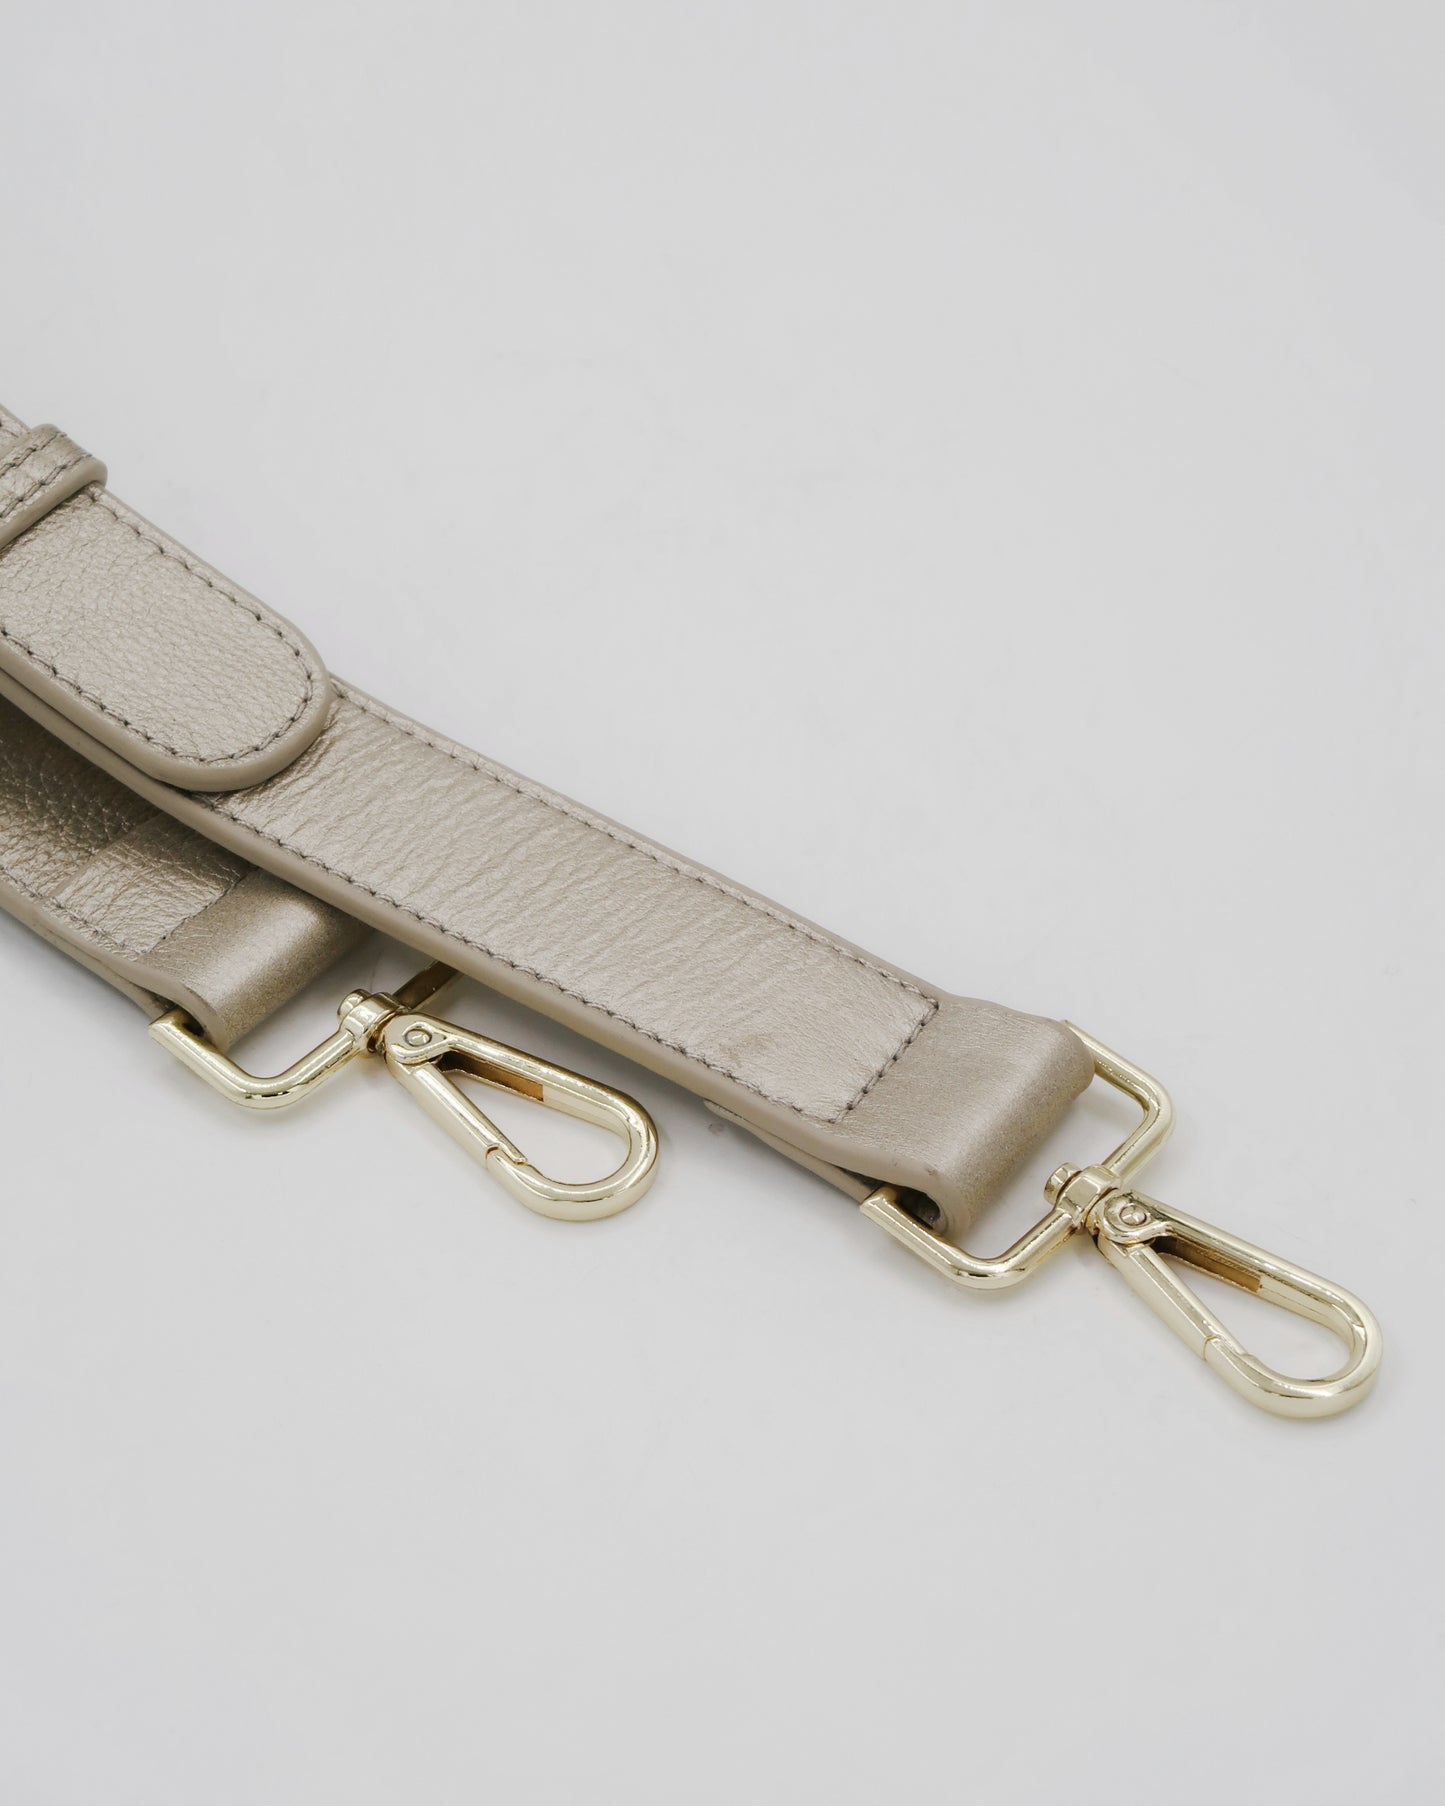 Roman Holiday Bag Strap  - Gold Leather/Gold